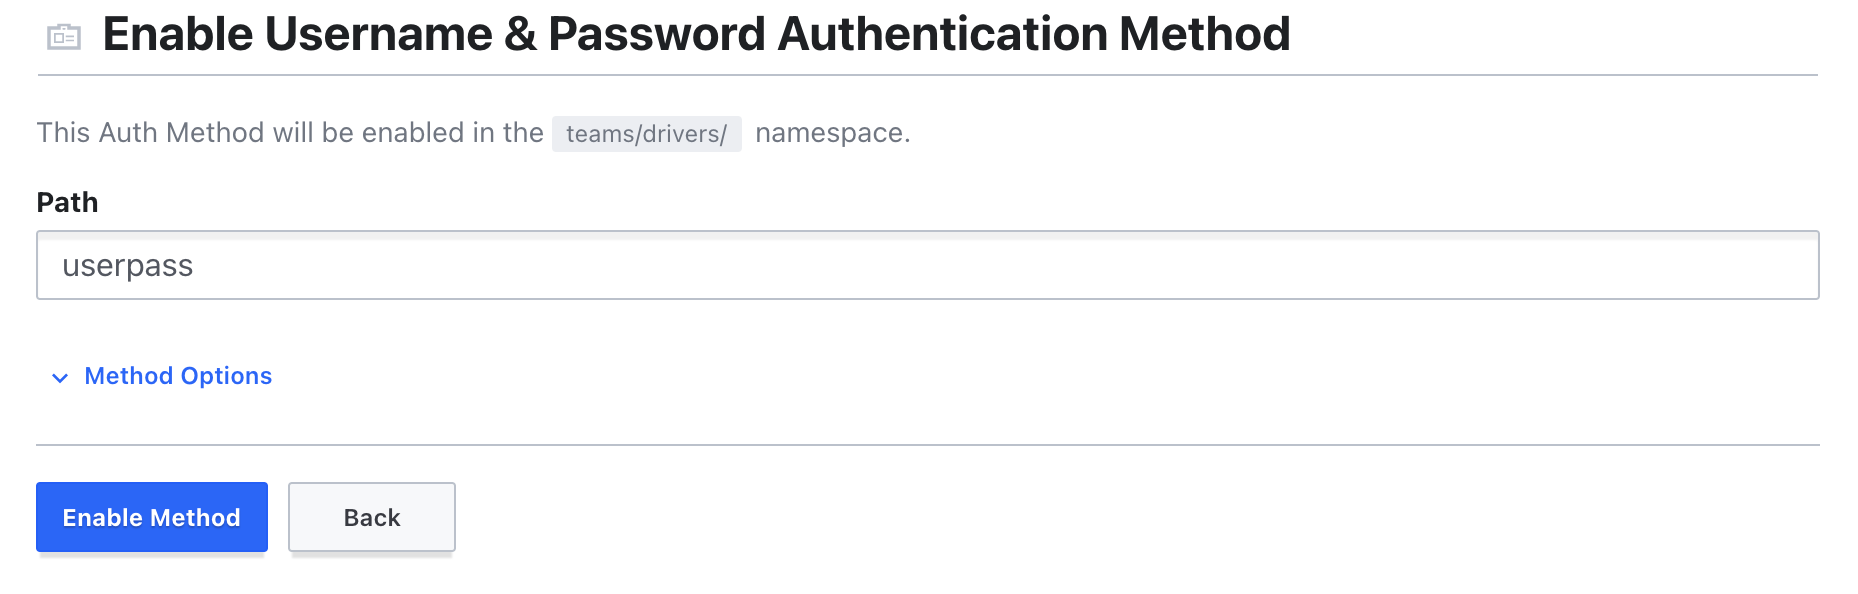 Auth method enabled